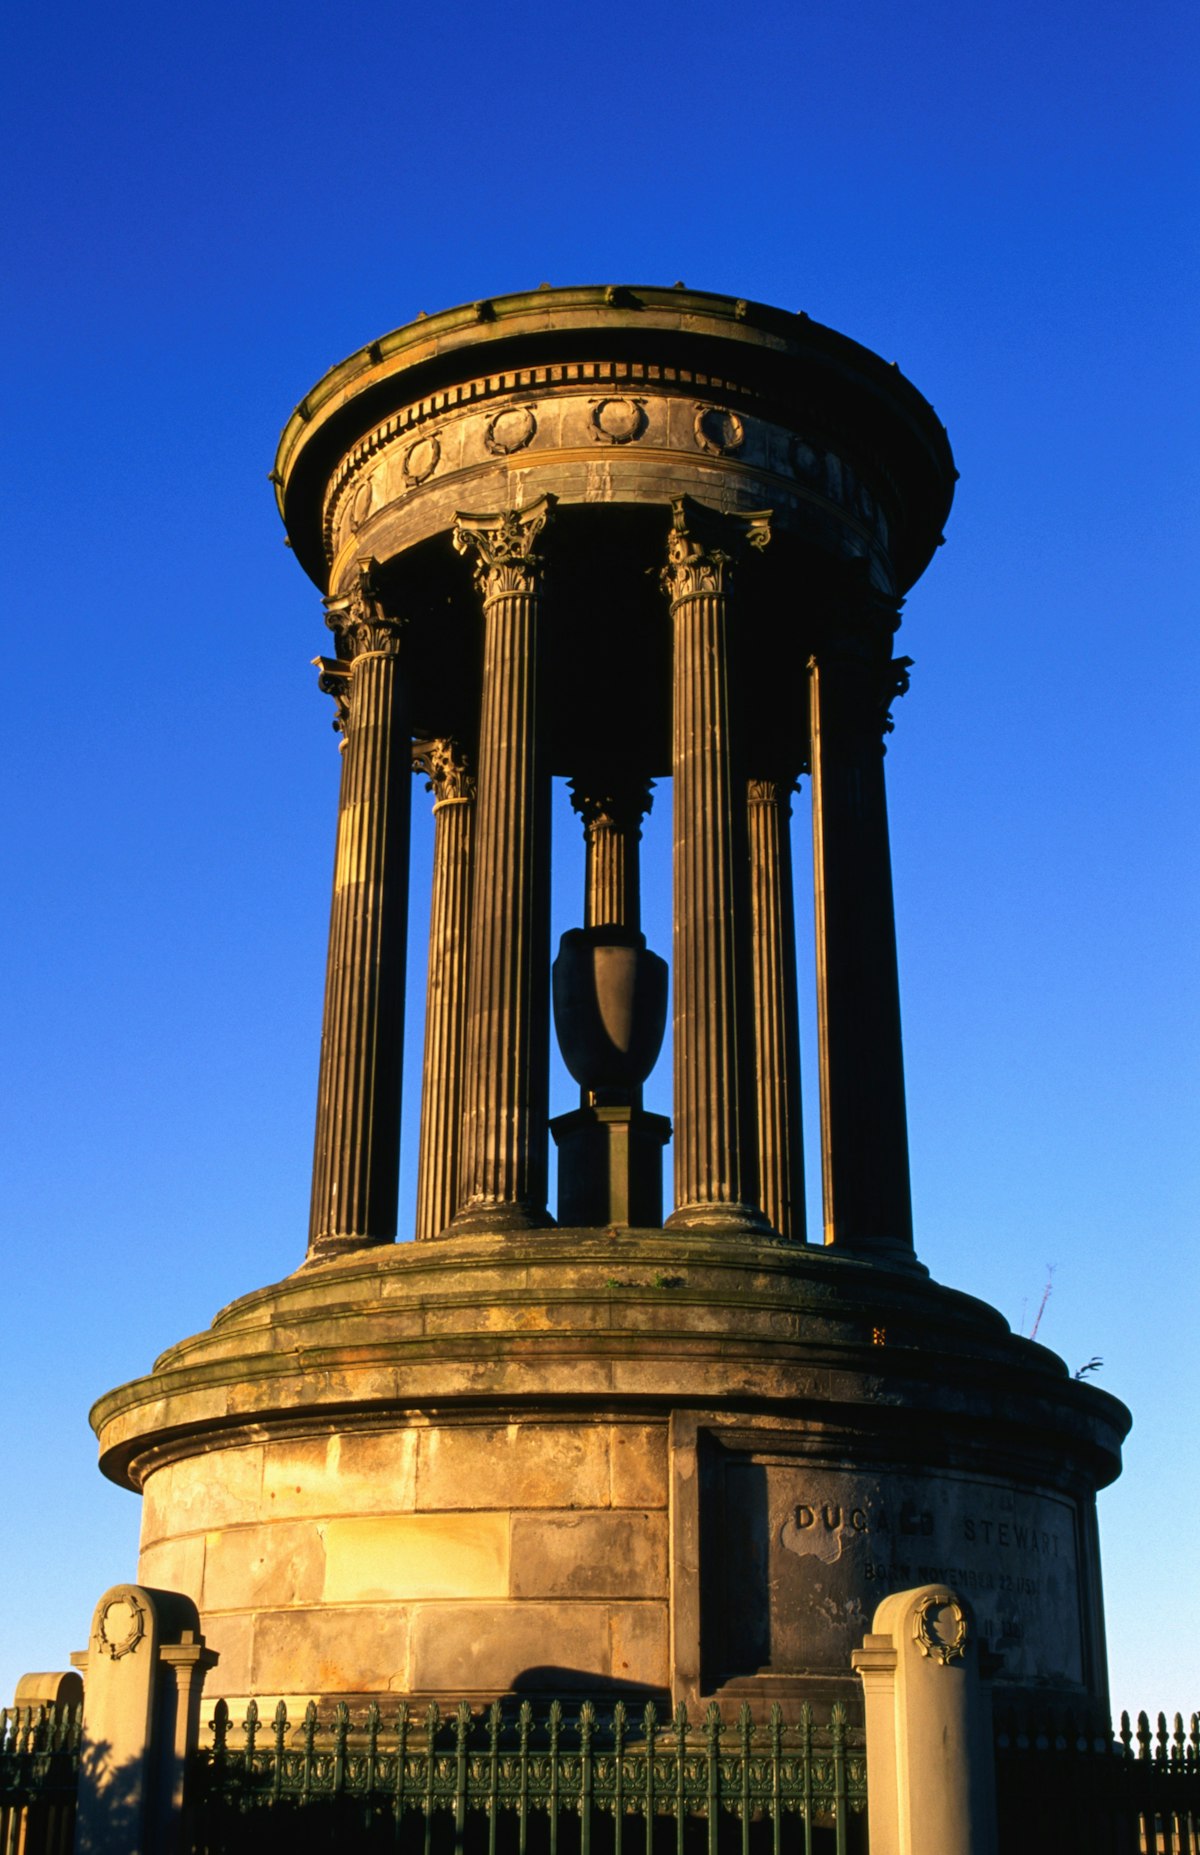 Monument to Dugald Stewart on Calton Hill.